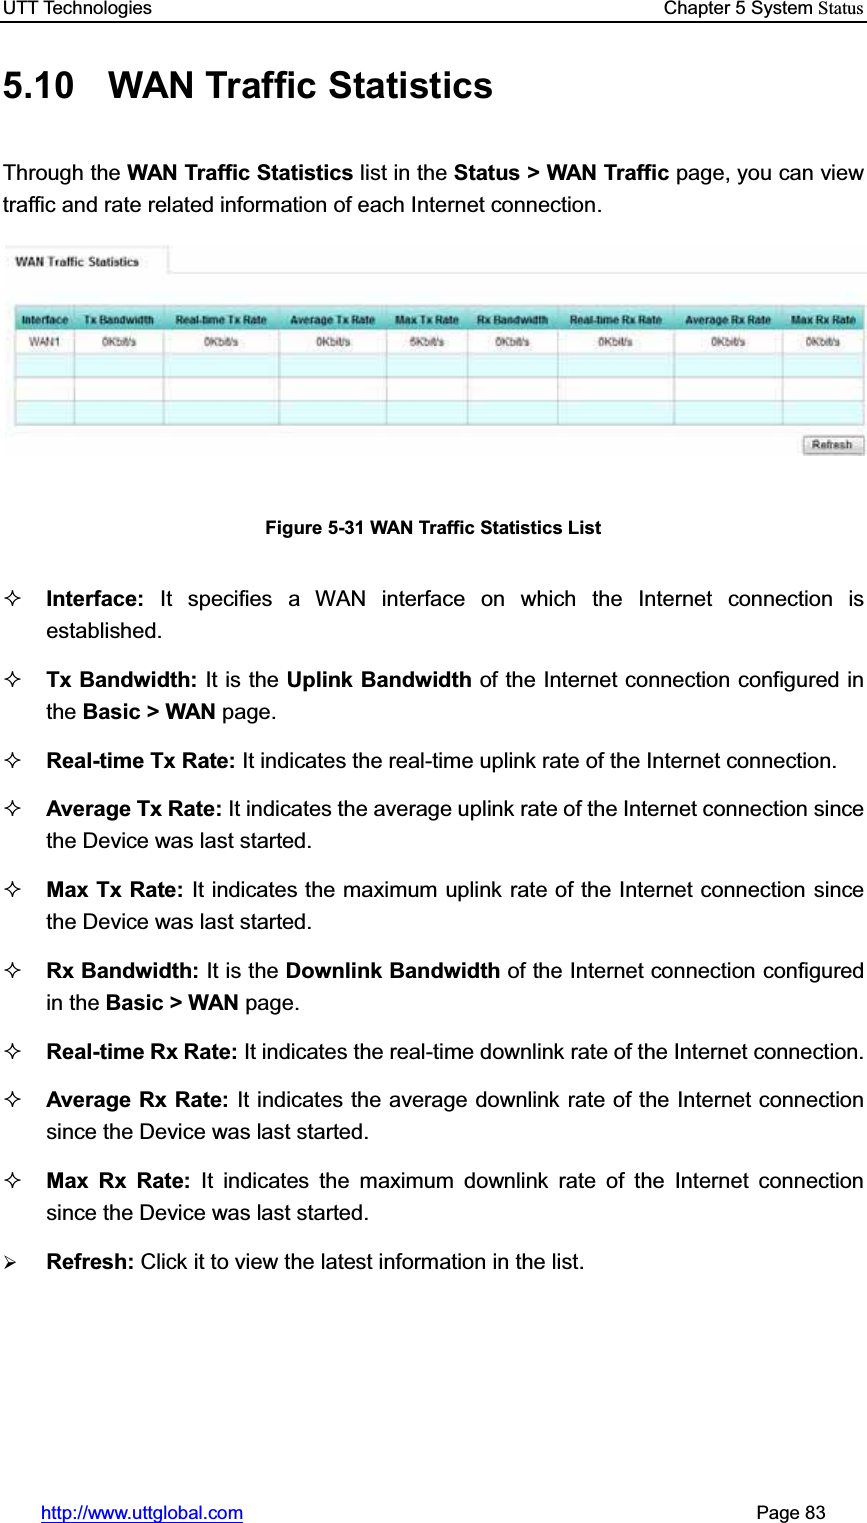 UTT Technologies    Chapter 5 System Statushttp://www.uttglobal.com                                                       Page 83 5.10  WAN Traffic Statistics Through the WAN Traffic Statistics list in the Status &gt; WAN Traffic page, you can view traffic and rate related information of each Internet connection. Figure 5-31 WAN Traffic Statistics List Interface:  It specifies a WAN interface on which the Internet connection is established.Tx Bandwidth: It is the Uplink Bandwidth of the Internet connection configured in the Basic &gt; WAN page.Real-time Tx Rate: It indicates the real-time uplink rate of the Internet connection.Average Tx Rate: It indicates the average uplink rate of the Internet connection sincethe Device was last started.Max Tx Rate: It indicates the maximum uplink rate of the Internet connection sincethe Device was last started.Rx Bandwidth: It is the Downlink Bandwidth of the Internet connection configured in the Basic &gt; WAN page.Real-time Rx Rate: It indicates the real-time downlink rate of the Internet connection.Average Rx Rate: It indicates the average downlink rate of the Internet connection since the Device was last started.Max Rx Rate: It indicates the maximum downlink rate of the Internet connection since the Device was last started.¾Refresh: Click it to view the latest information in the list.